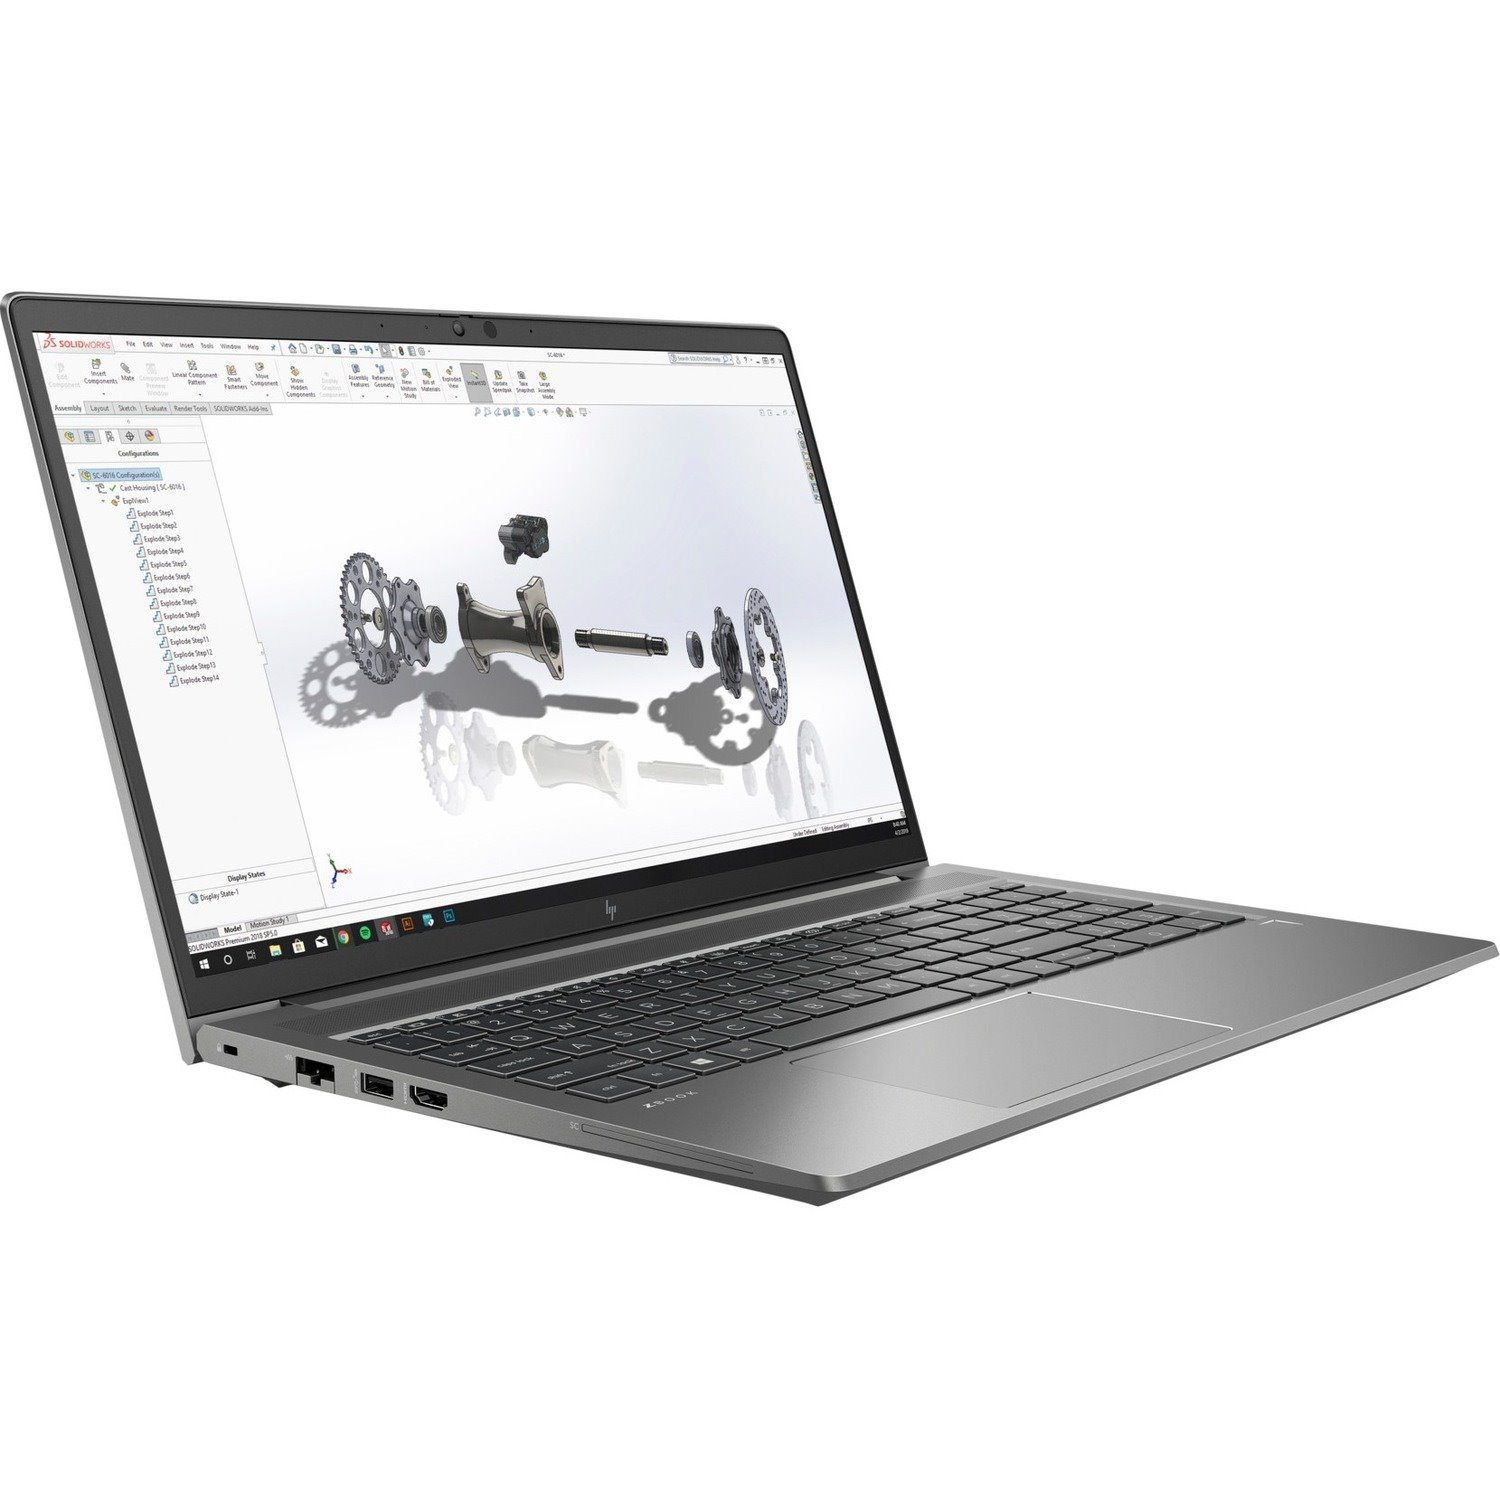 HP ZBook Power G8 15.6" Mobile Workstation - Intel Core i5 11th Gen i5-11400H - 16 GB - 512 GB SSD - English, French Keyboard